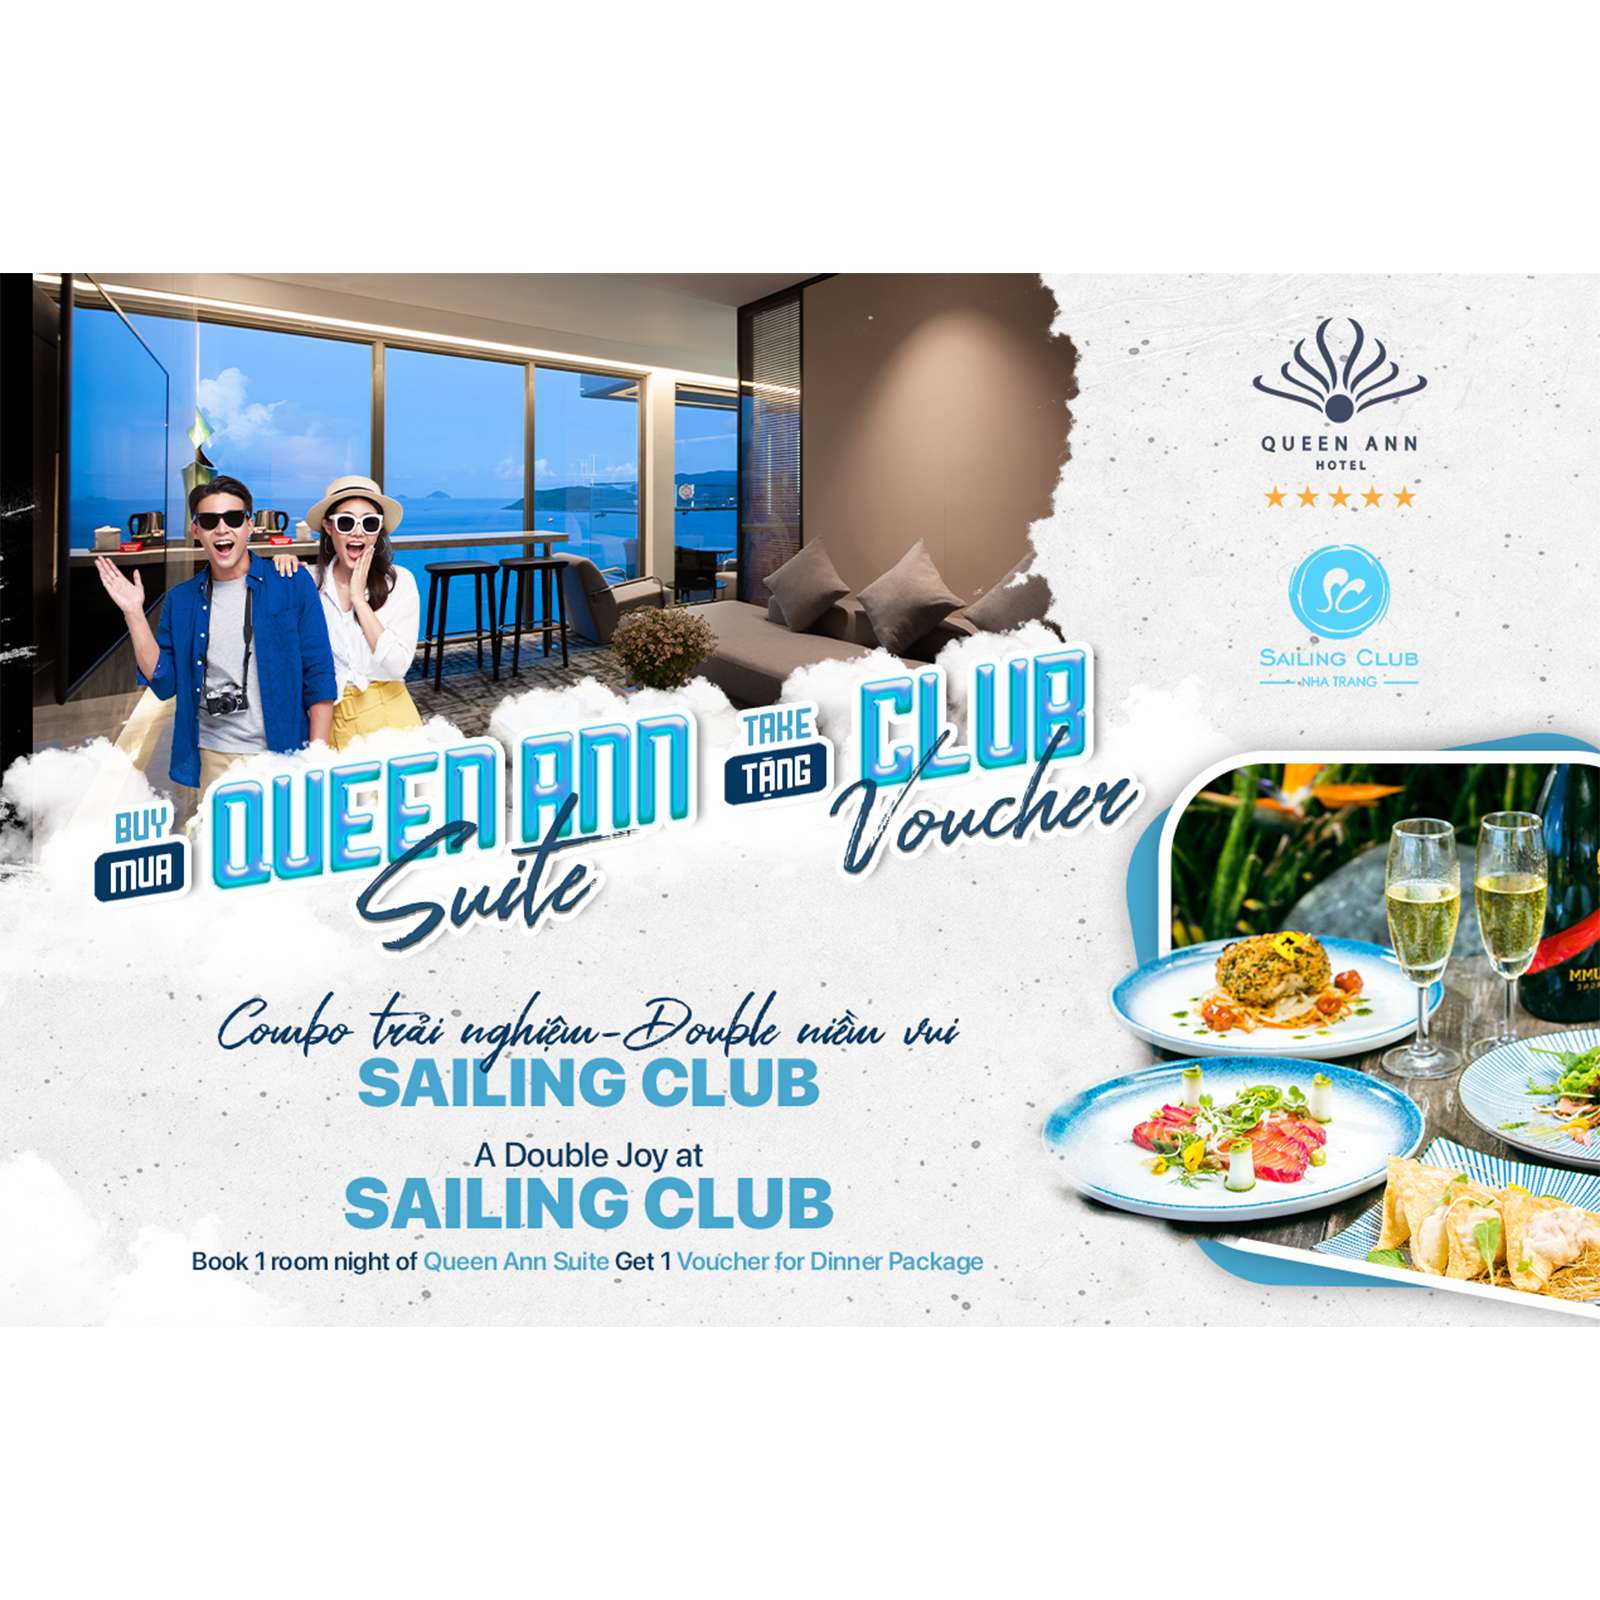 One night stay at the premium Queen Ann Suite, receive a Sailing Club Voucher for a sumptuous dinner